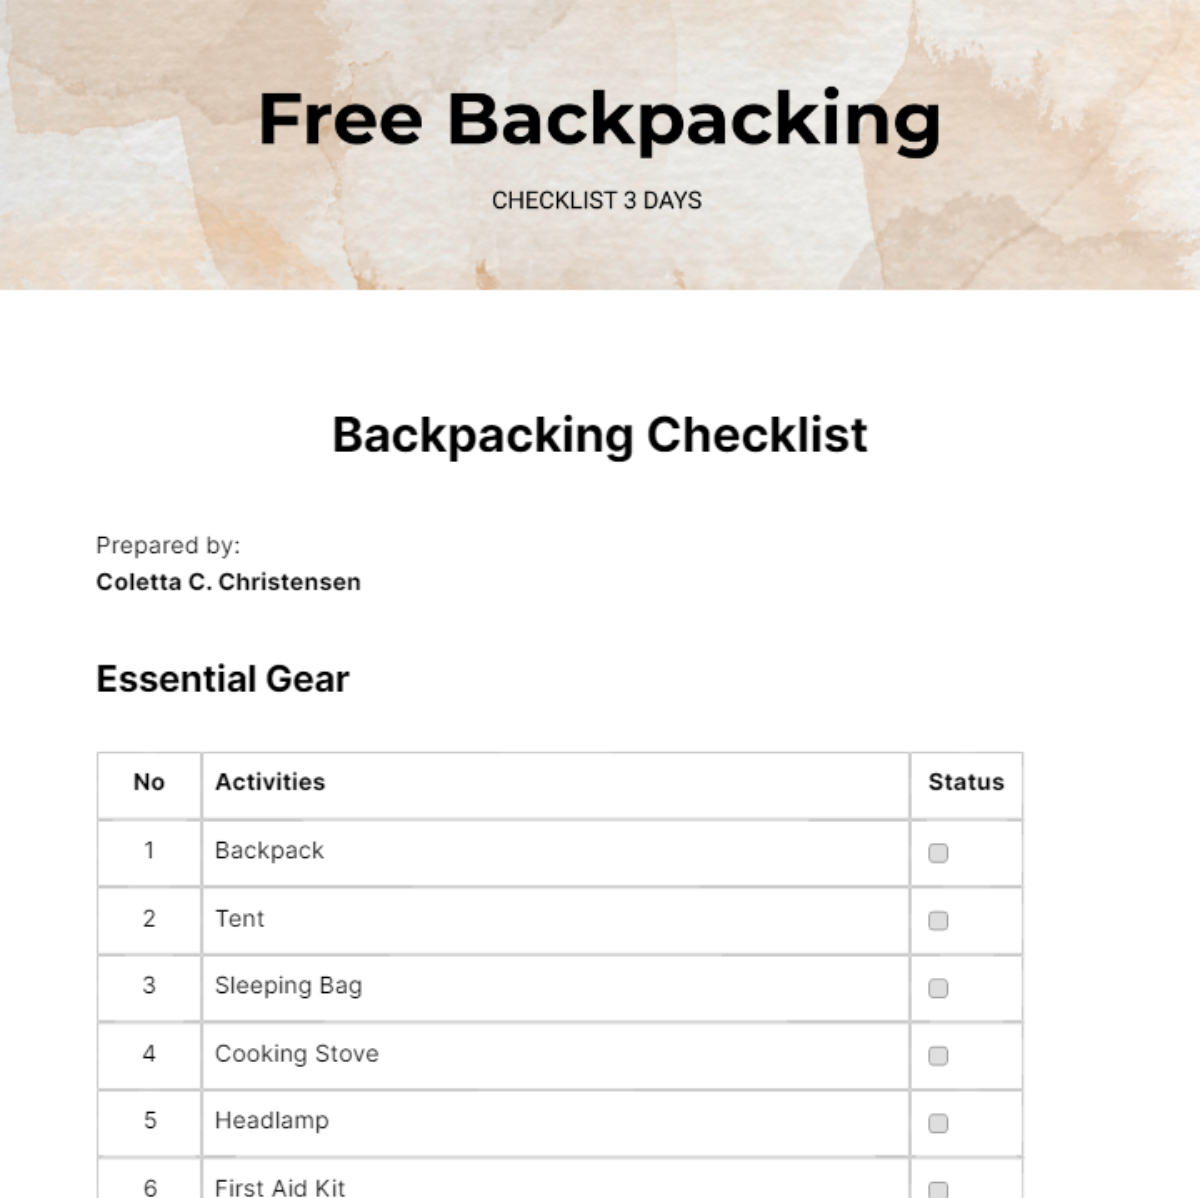 Free Backpacking Checklist 3 Day - Edit Online & Download